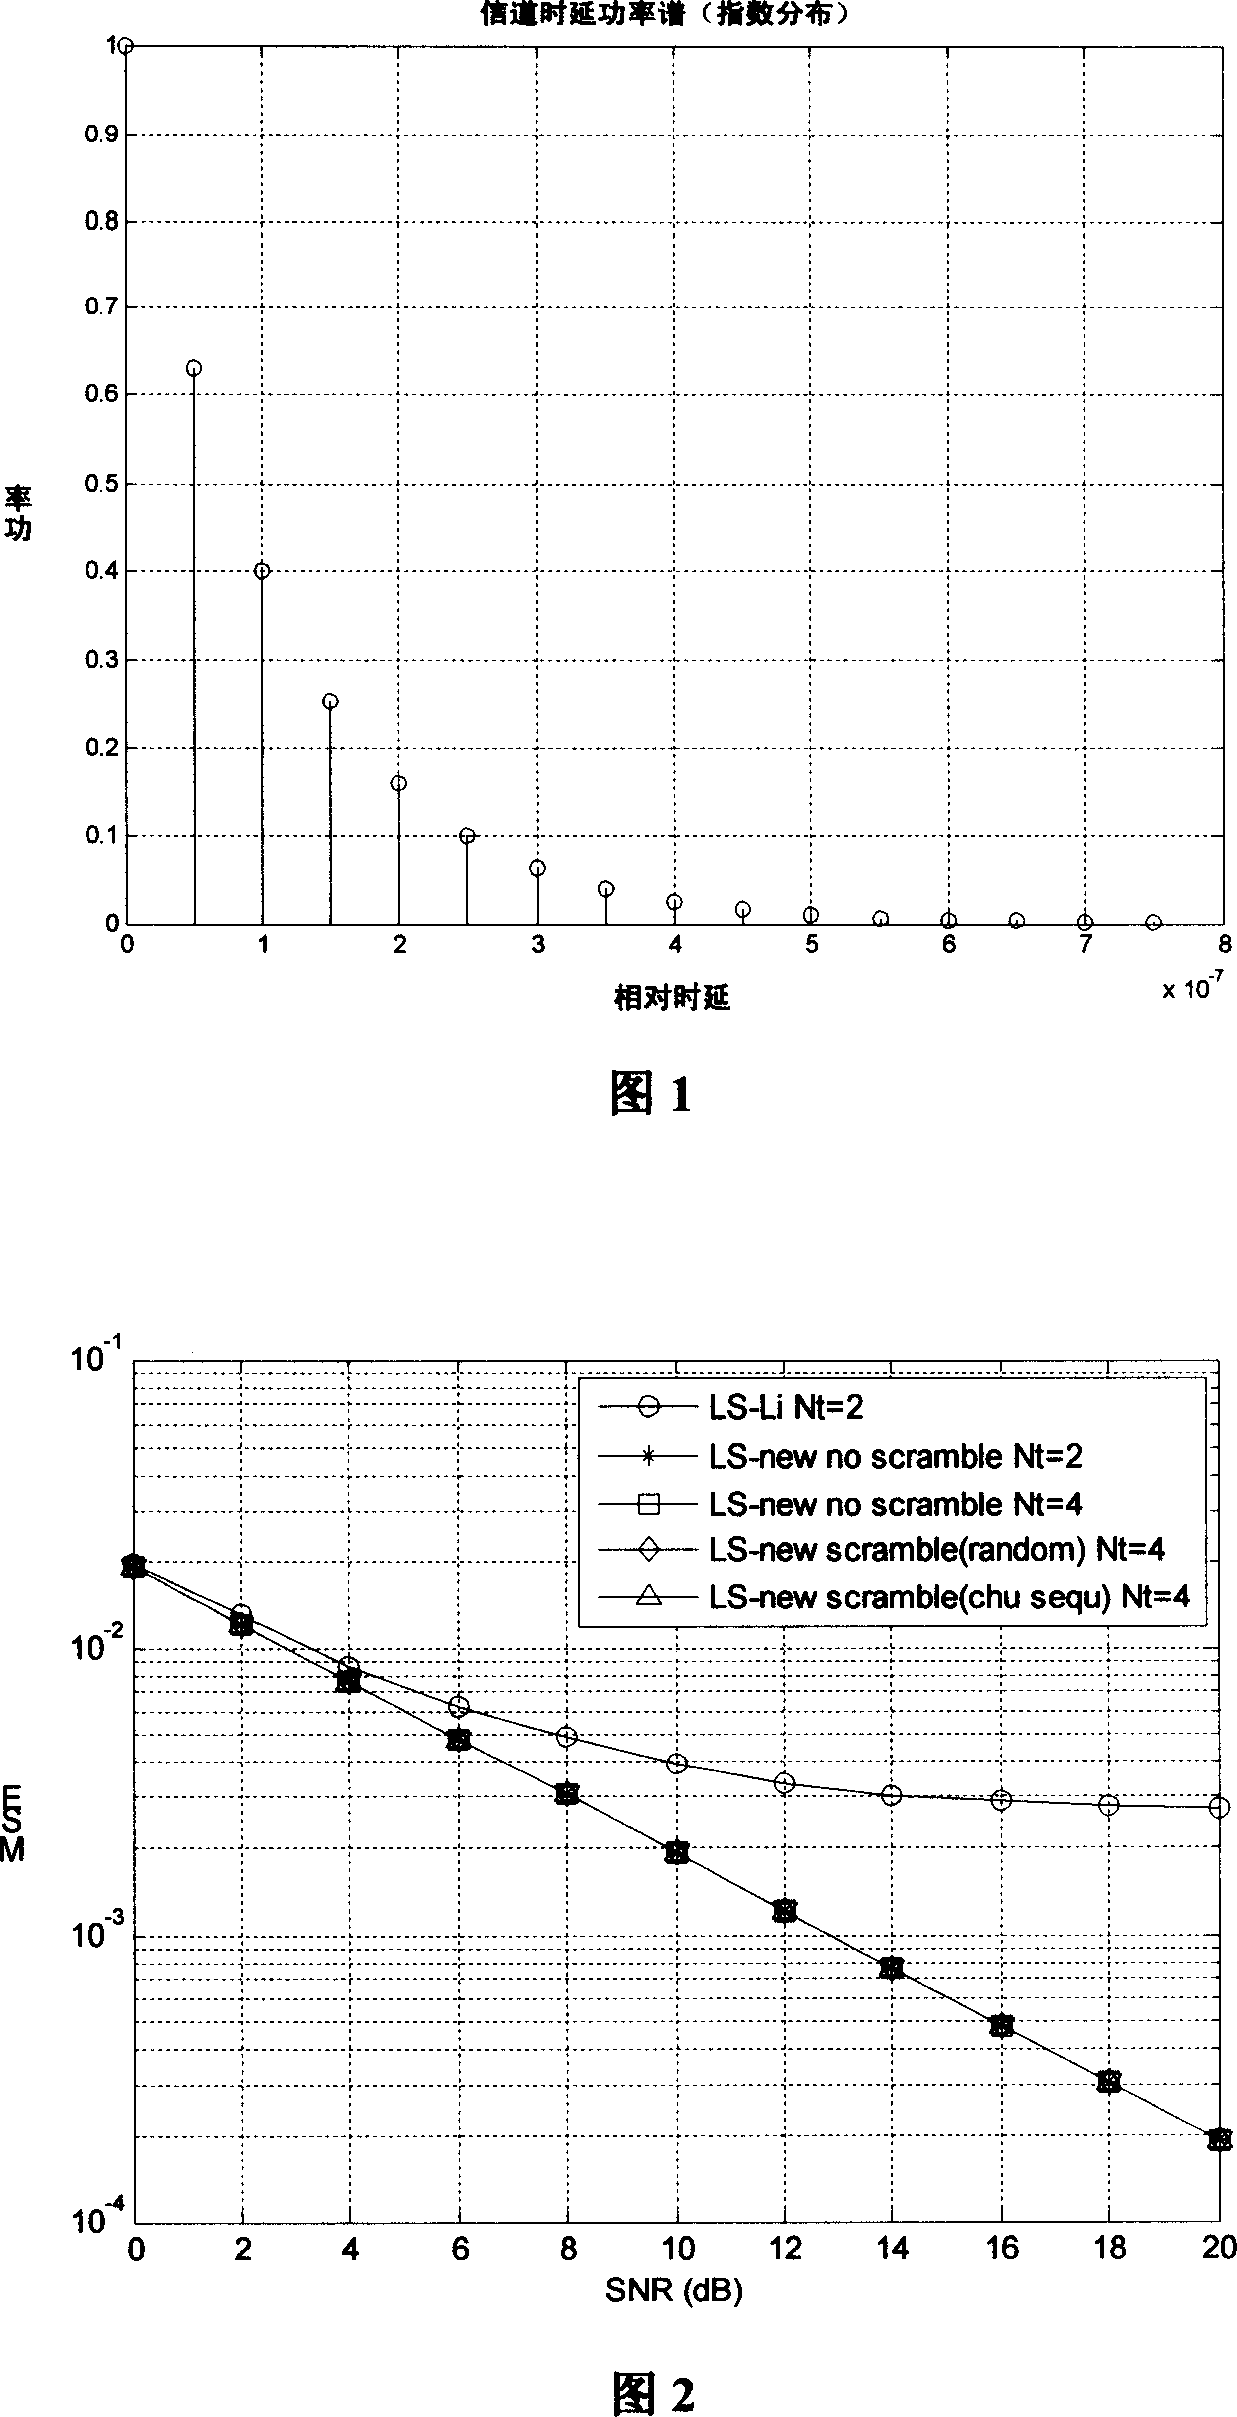 Orthogonal pilot frequency sequence design method